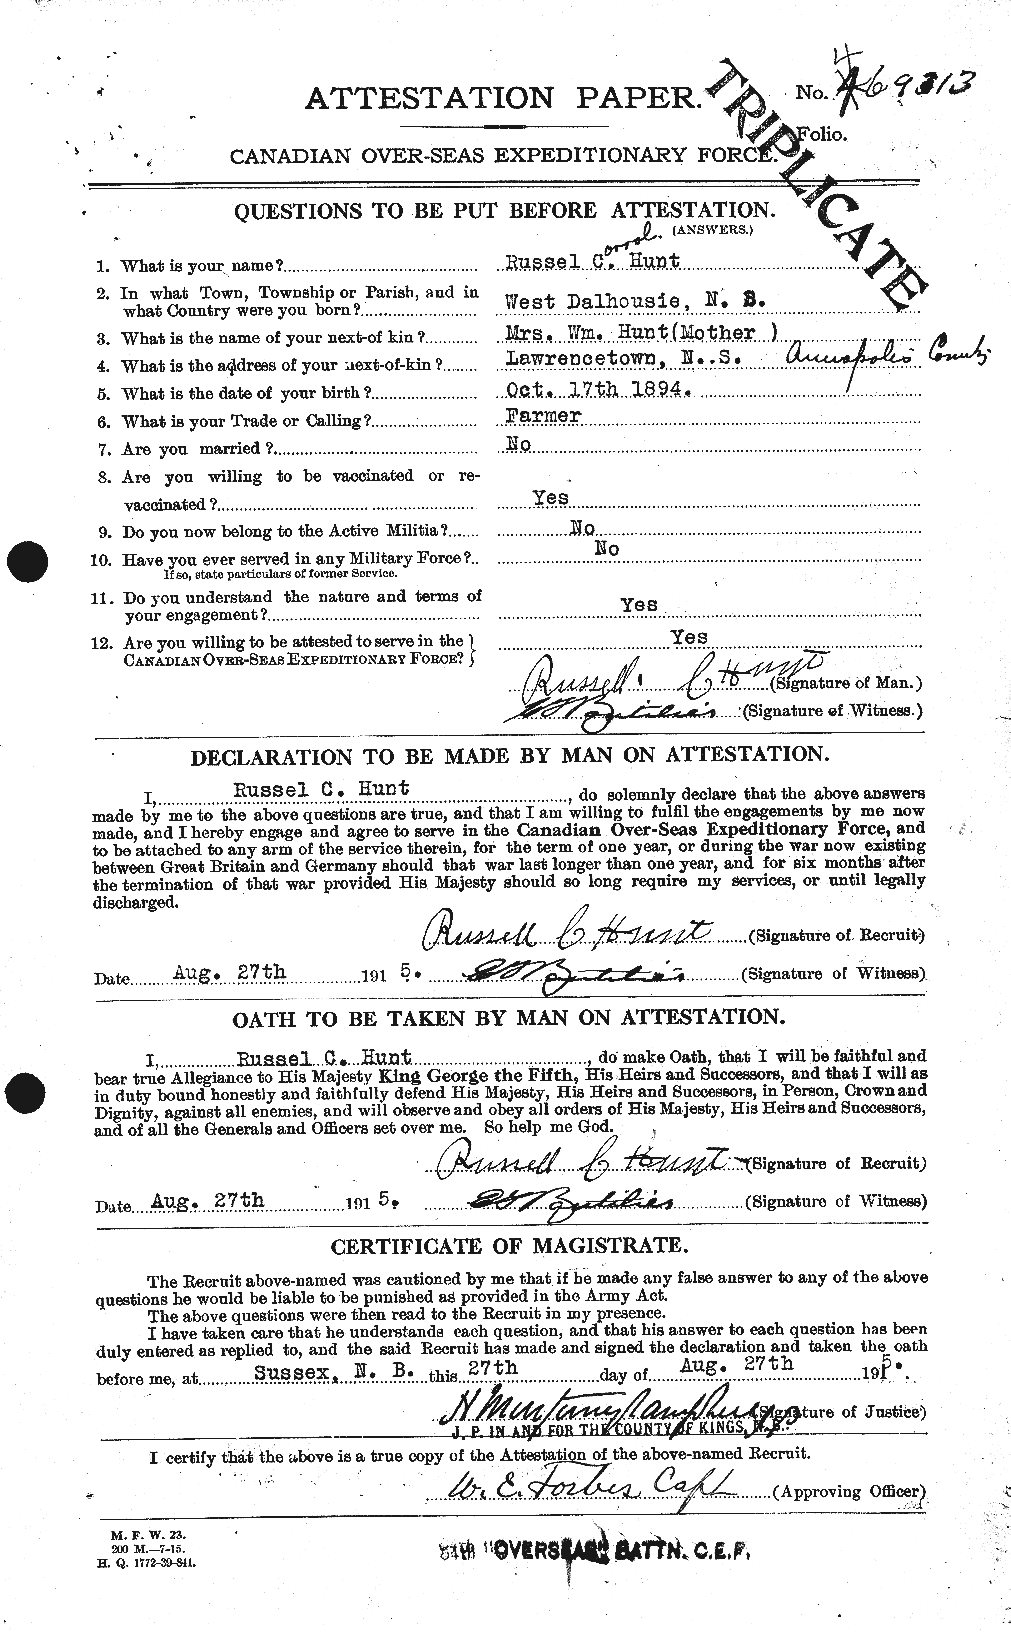 Personnel Records of the First World War - CEF 407742a